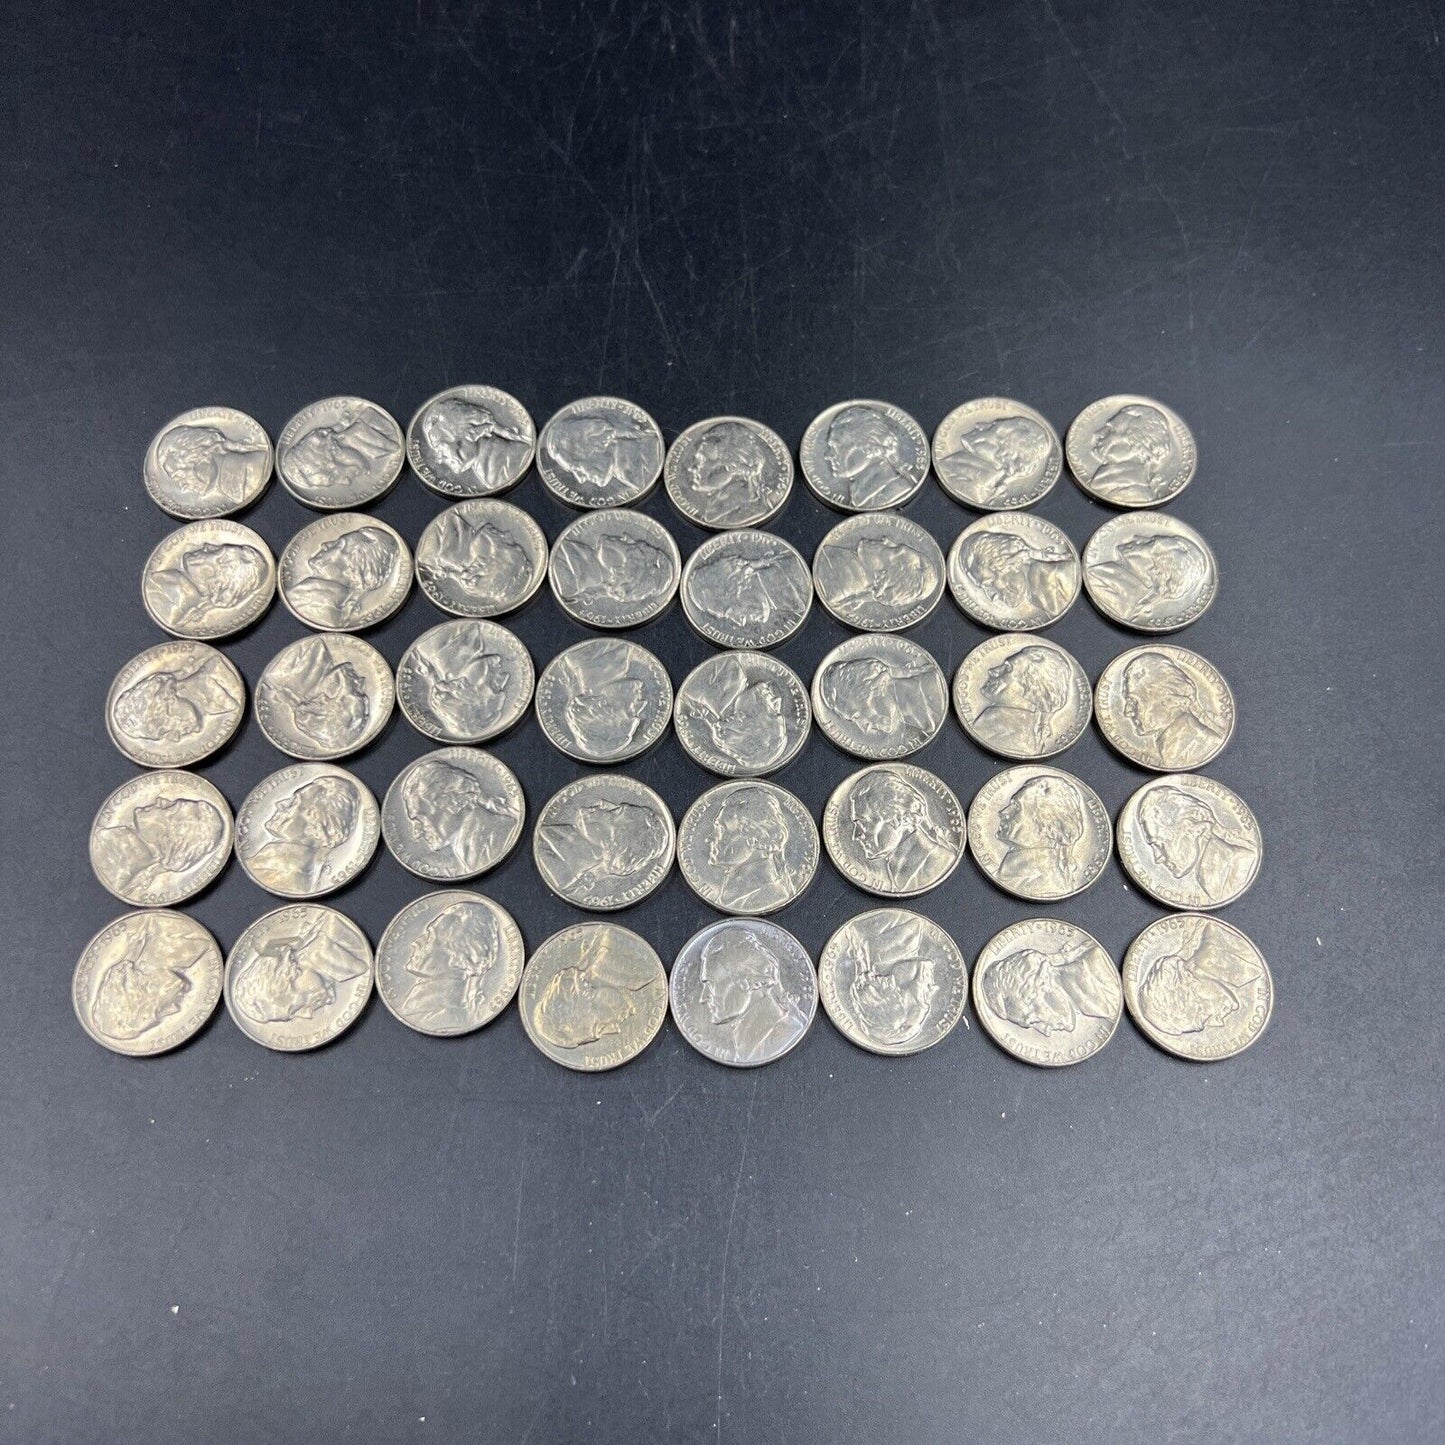 40 Coin BU roll 1965 5c Jefferson Nickel CH Uncirculated Exact Coins Pictured #2